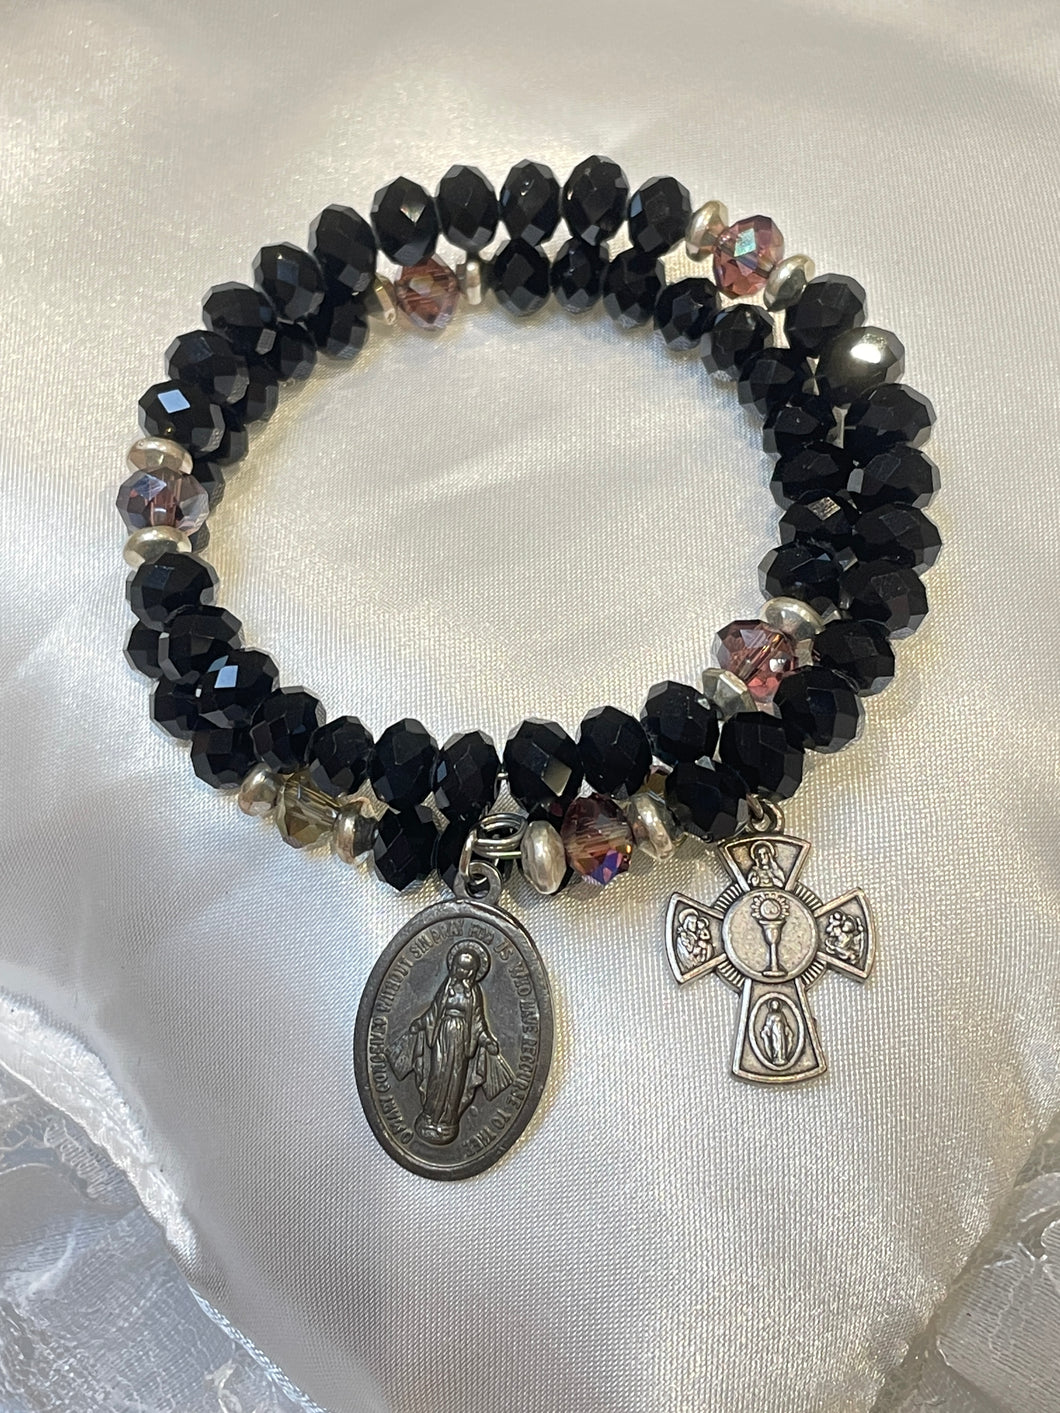 Black and Translucent Opal Crystal Rosary Bracelet with Miraculous Medal and Cross Charms